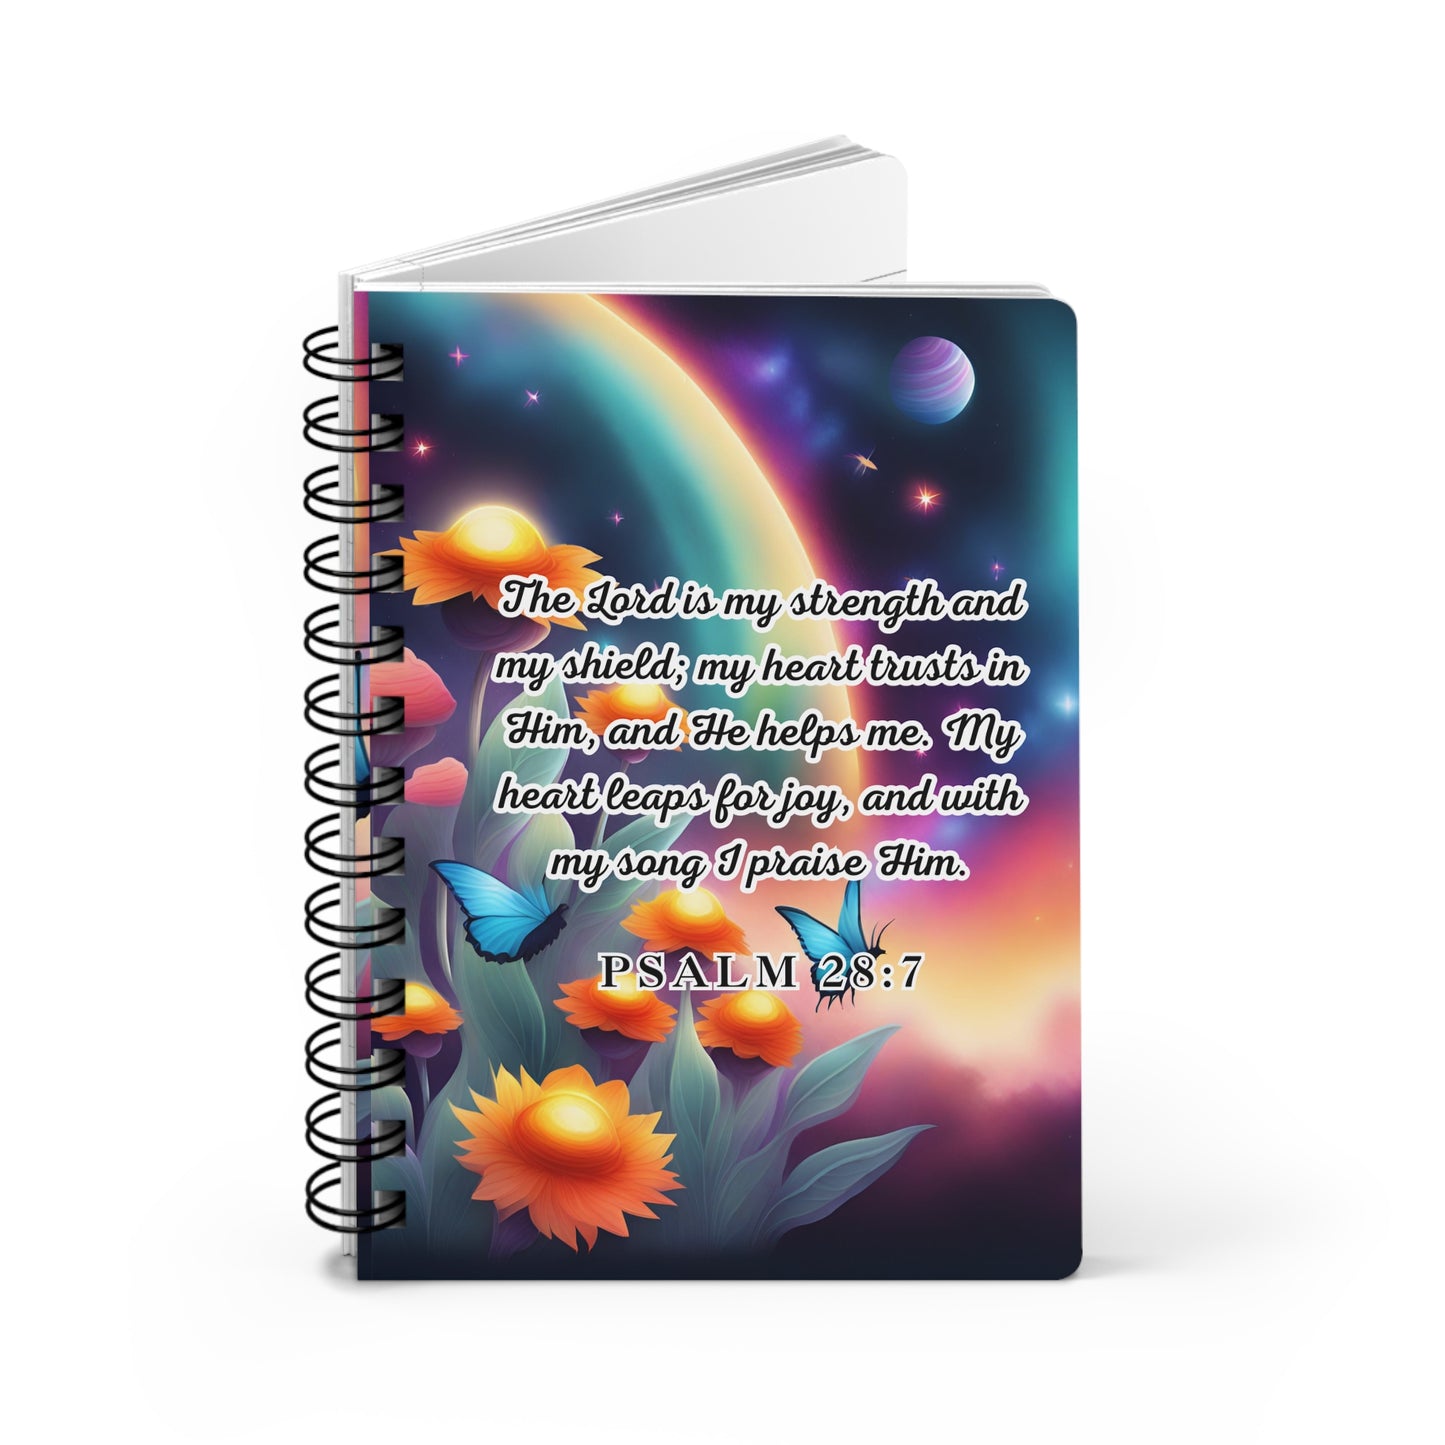 Journal, Empowering bible verses, more gifts